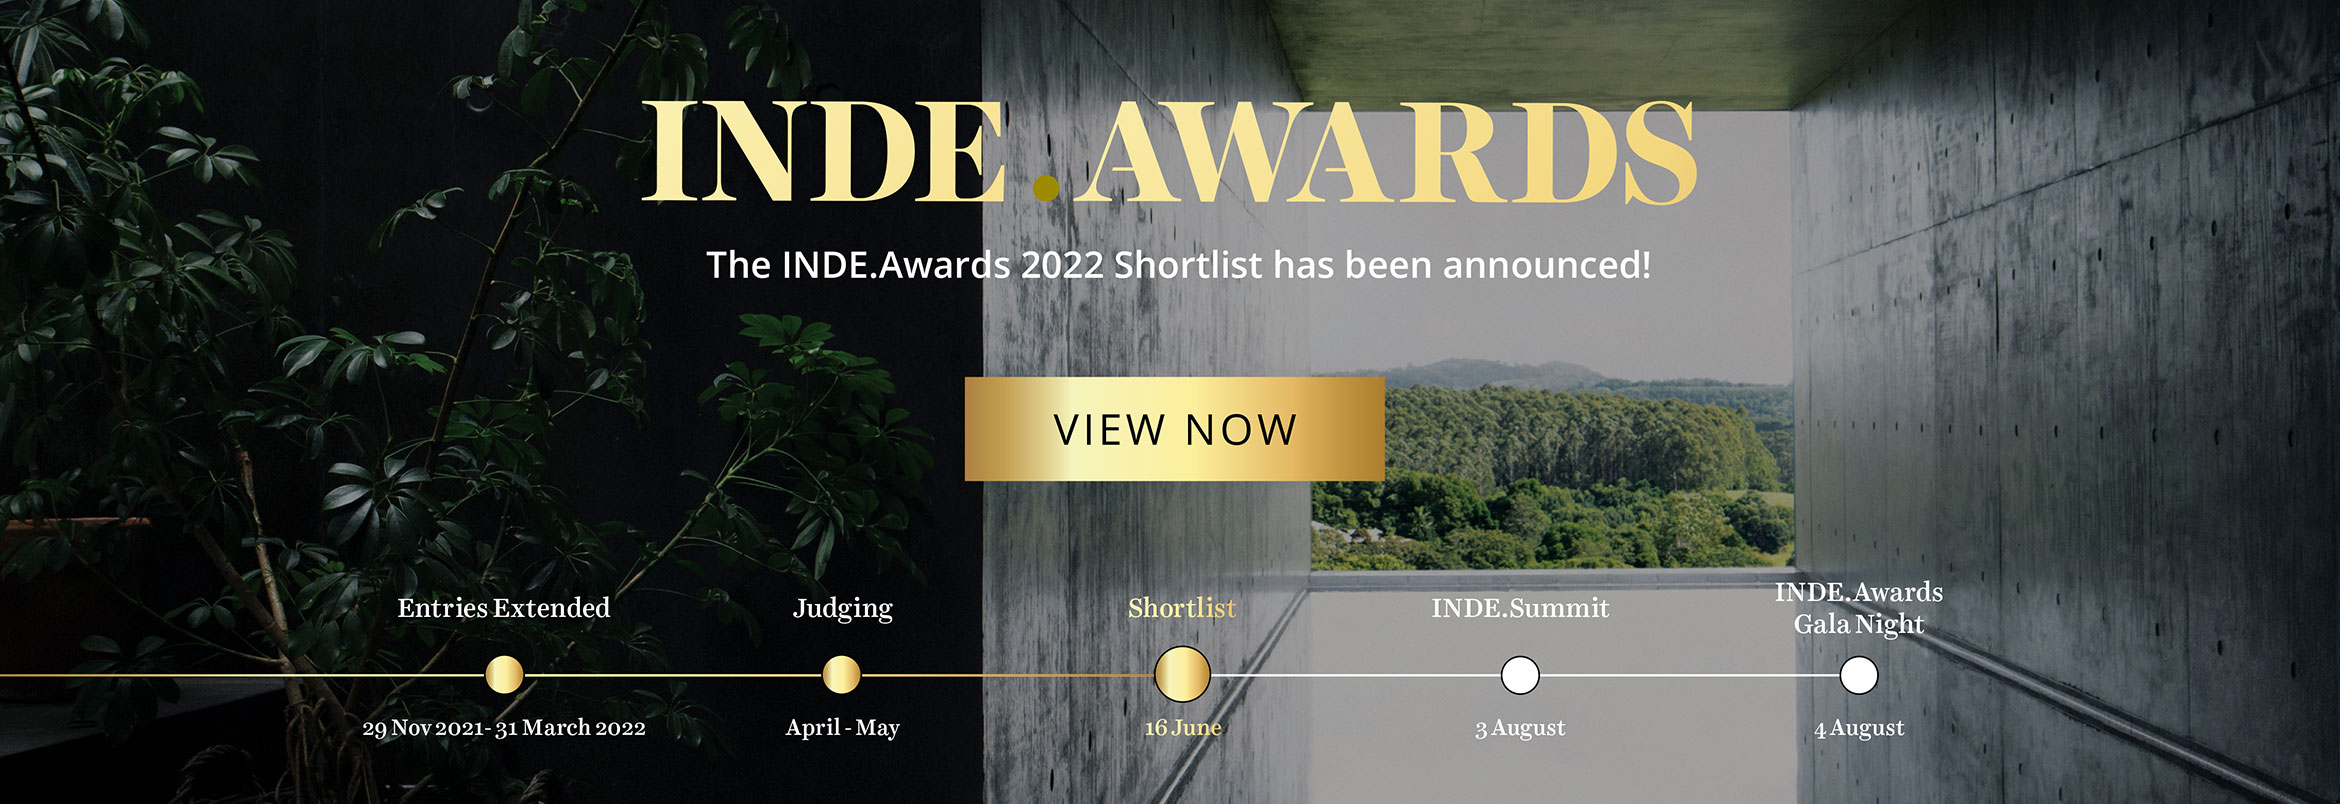 The INDE.Awards 2022 Shortlist has been announced!